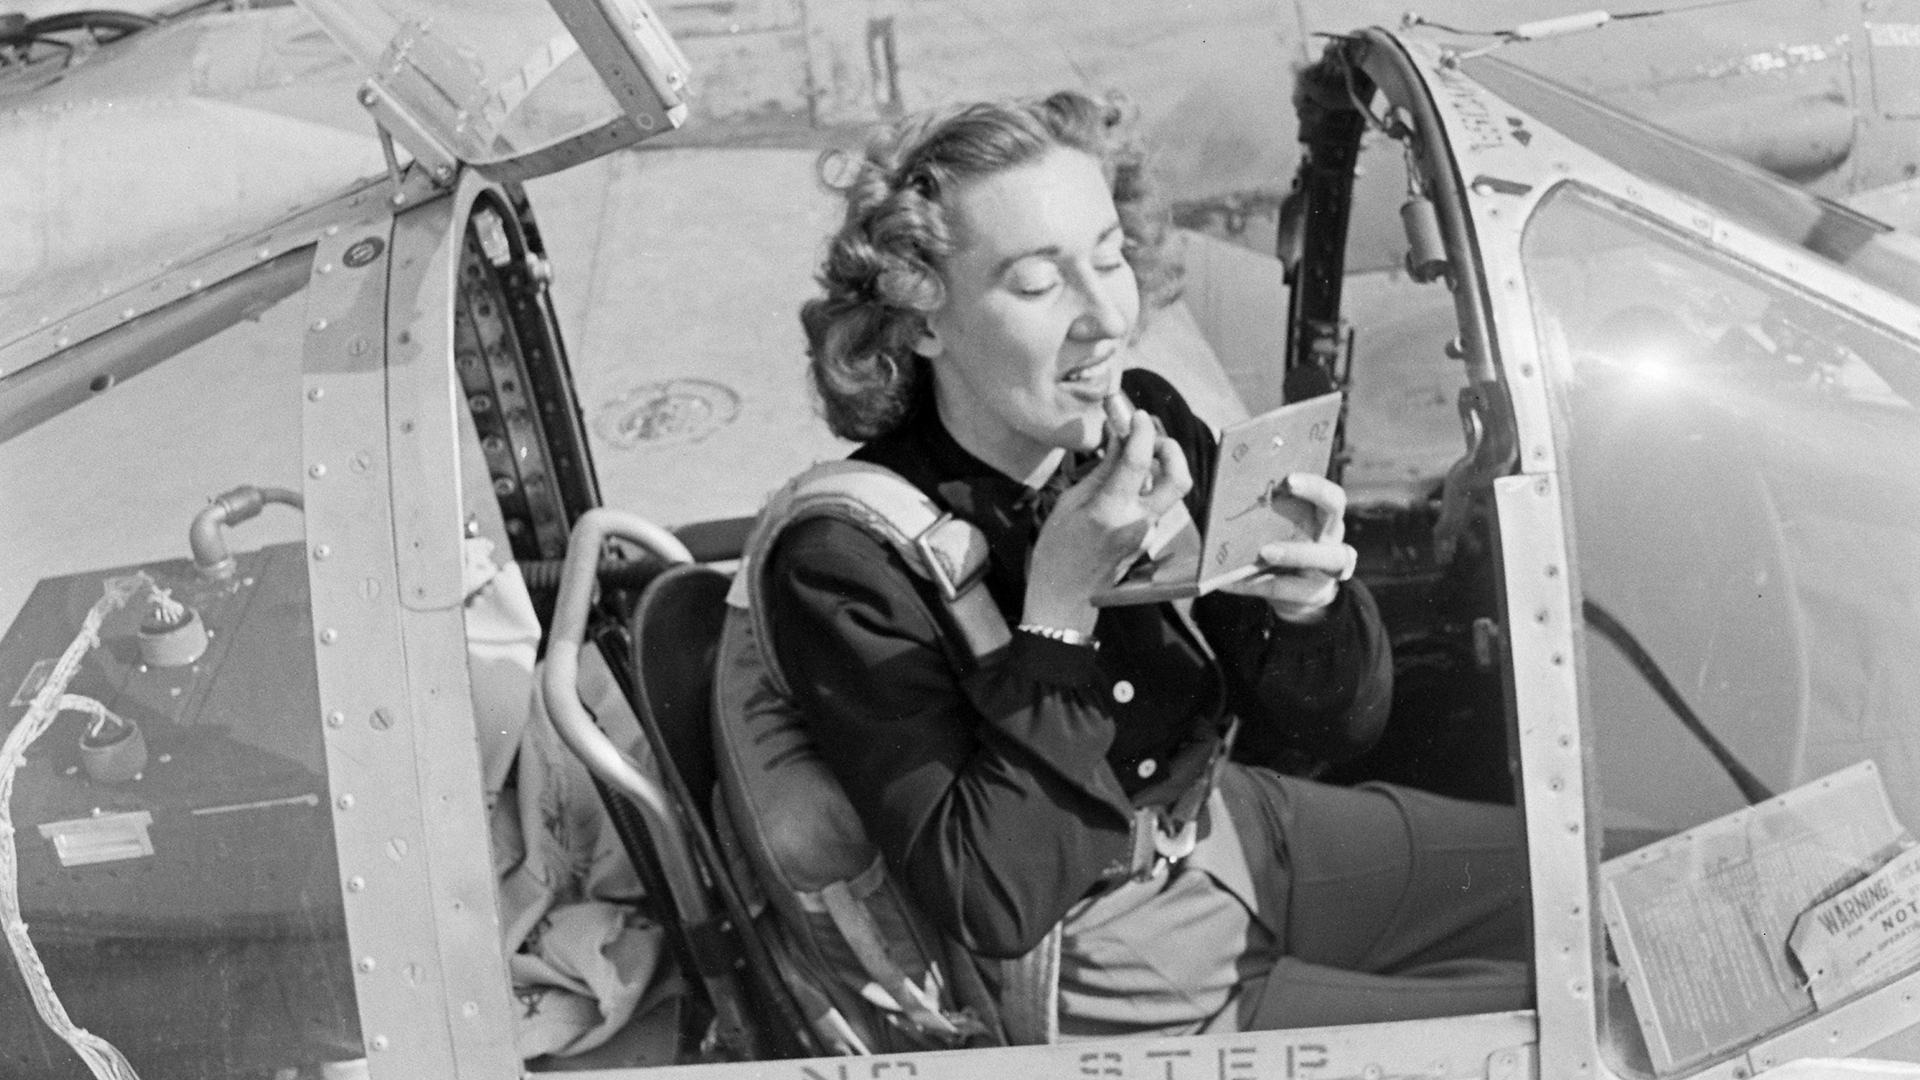 July 8, 1948: Esther Blake Became the First Female Member Accepted Into the U.S. Air Force